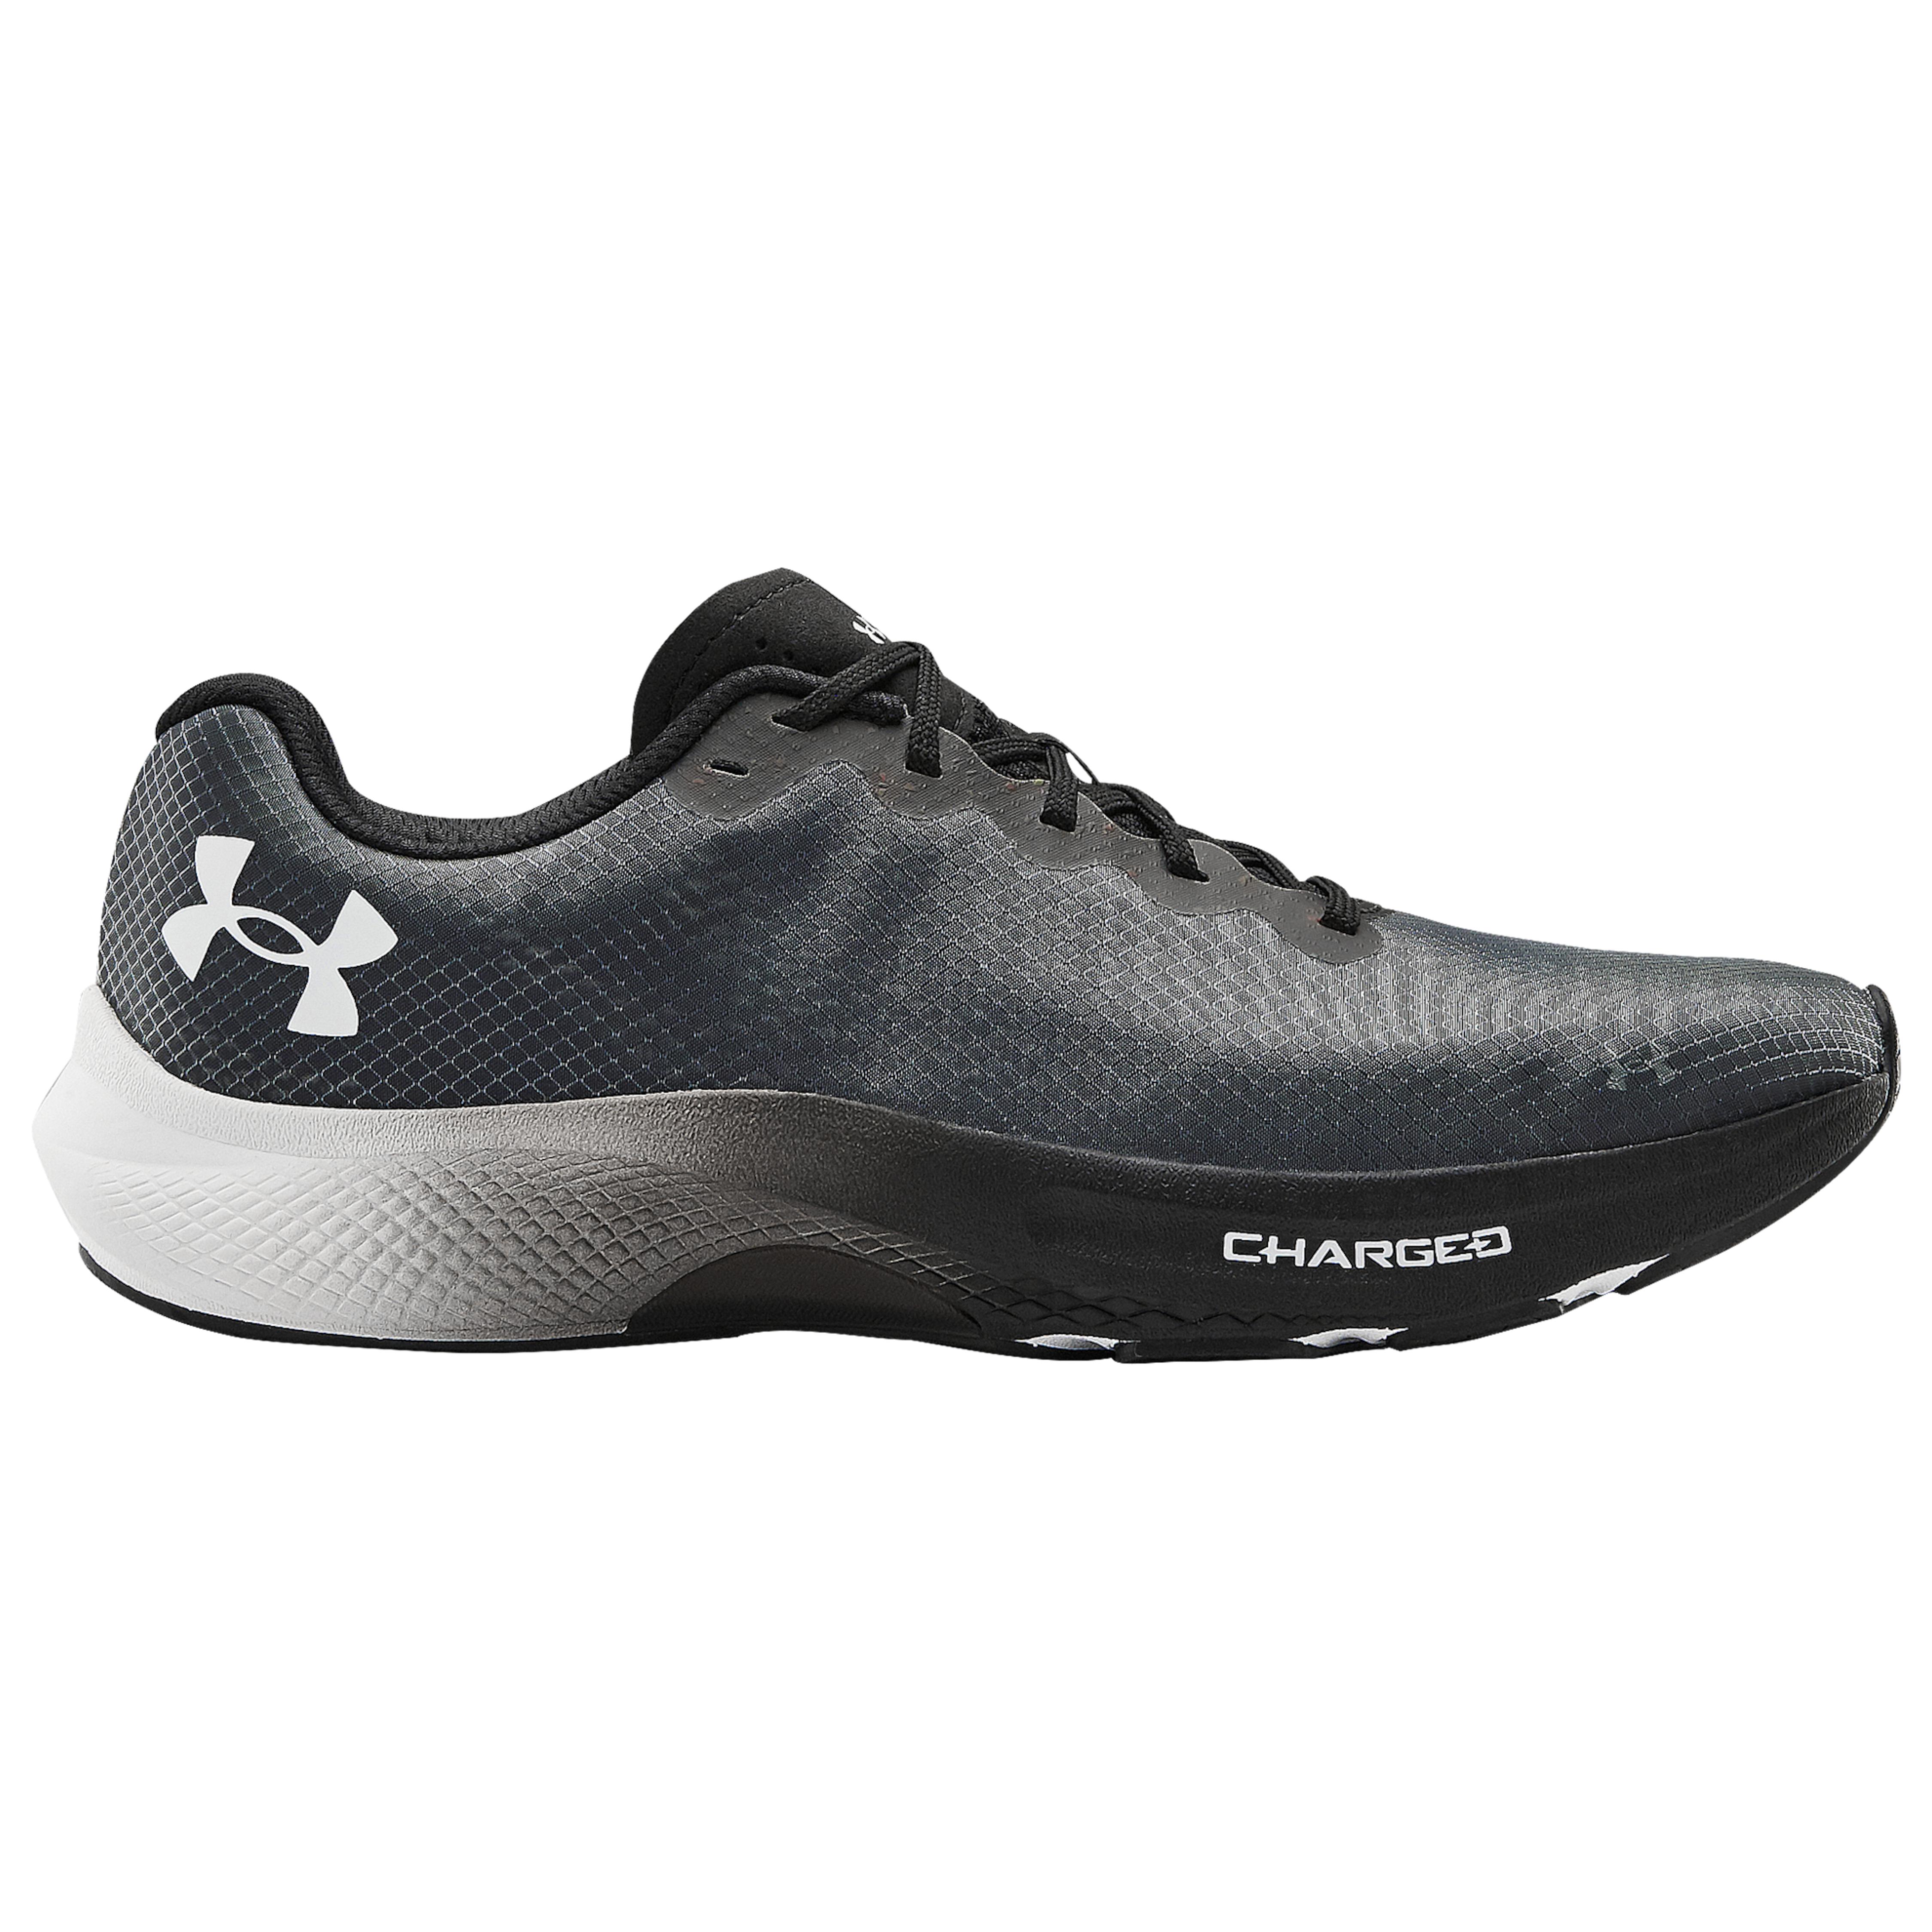 Under Armour Rubber Charged Pulse in Black/White/White (Black) for Men ...